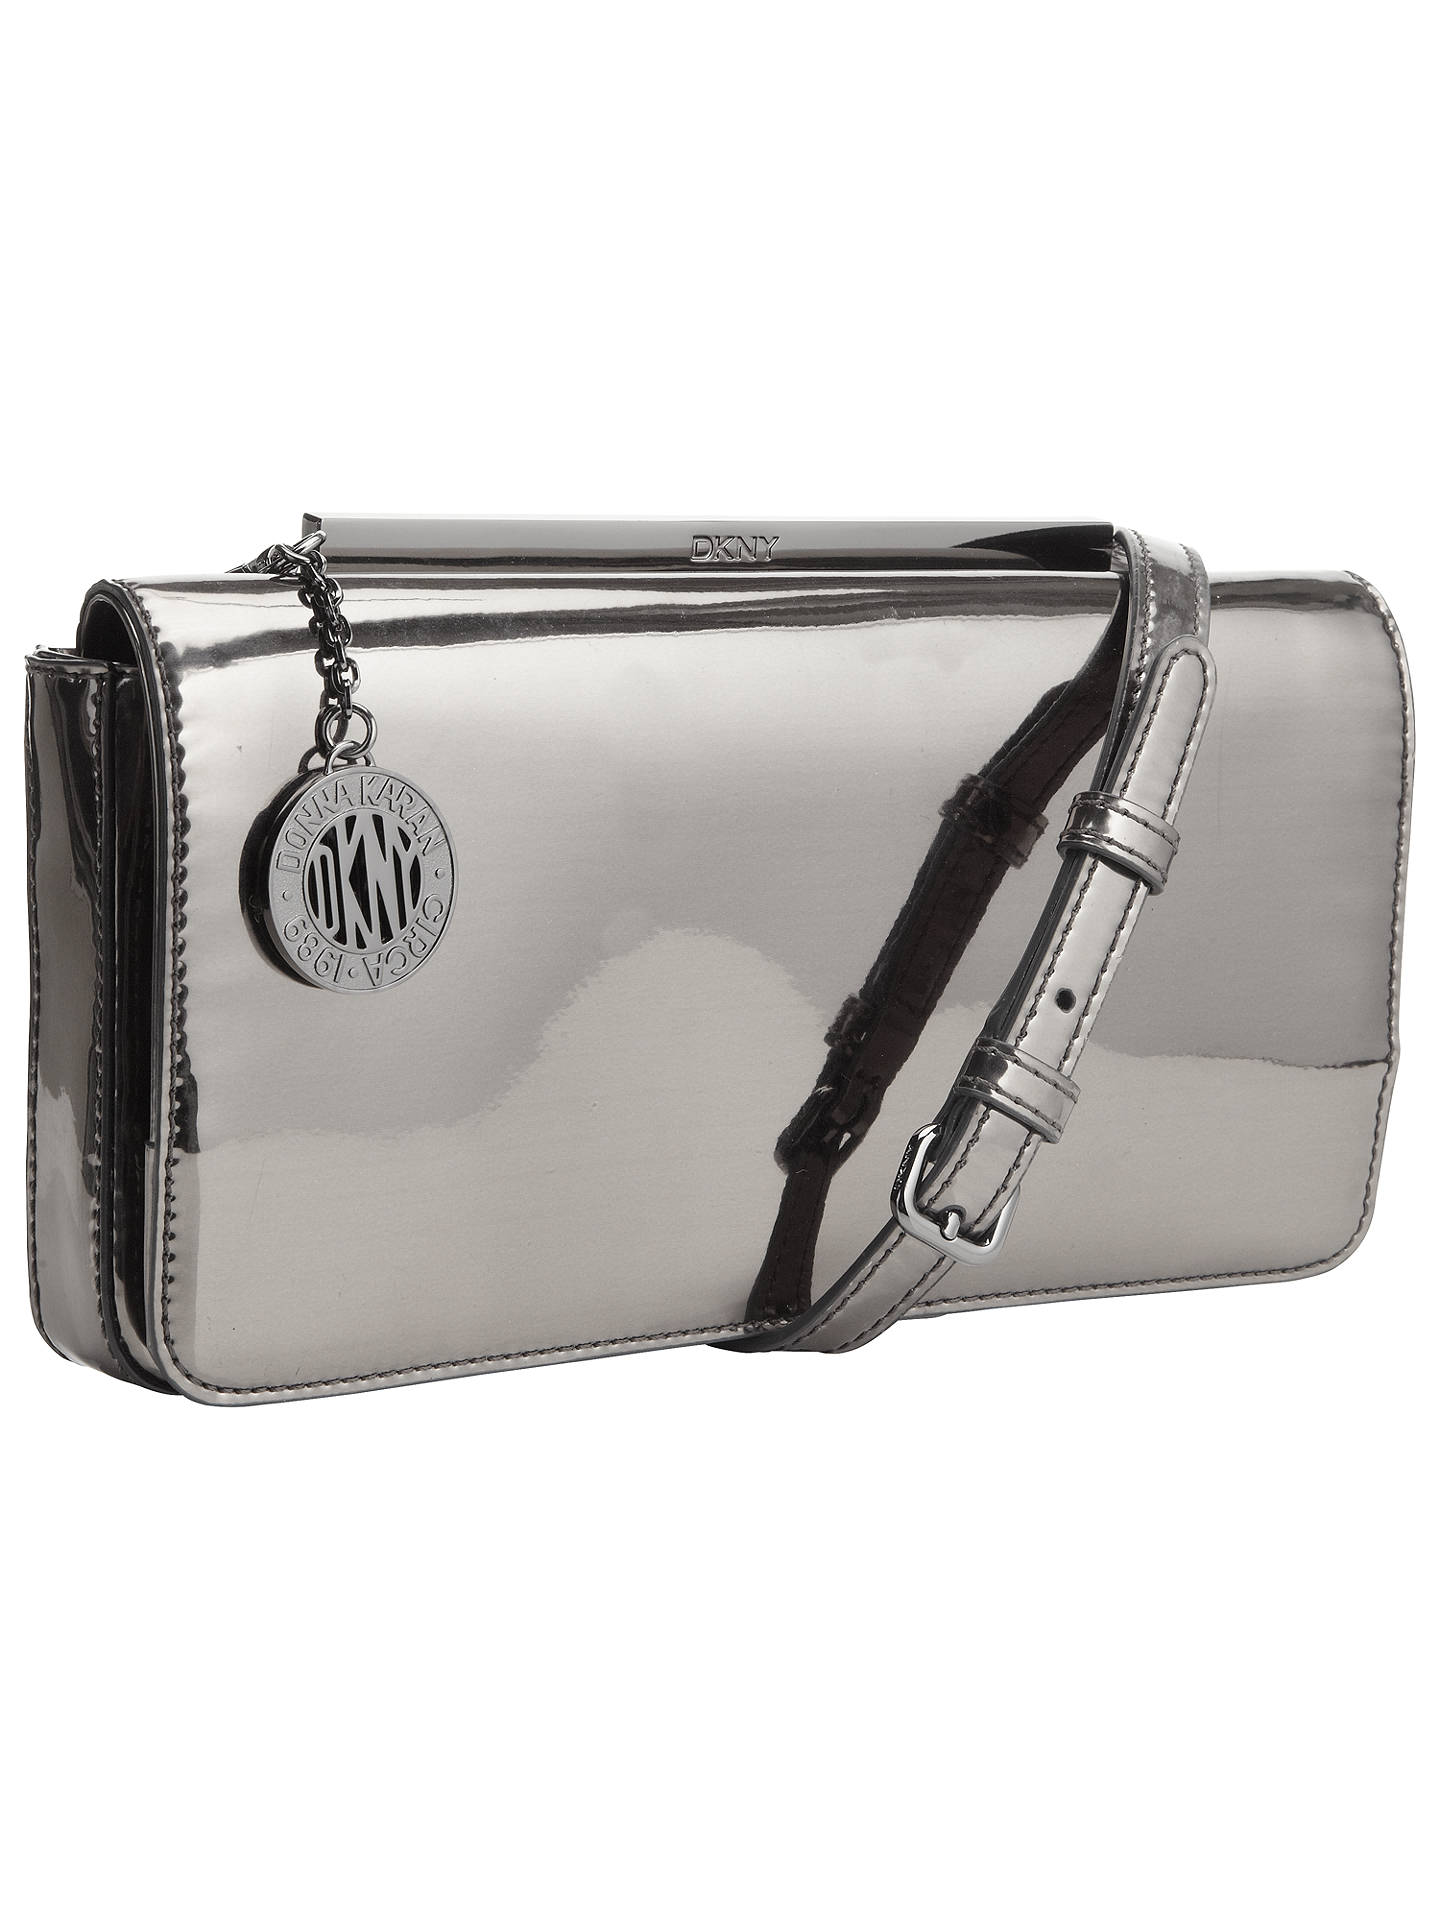 DKNY Mirror Leather Clutch Bag, Silver at John Lewis & Partners